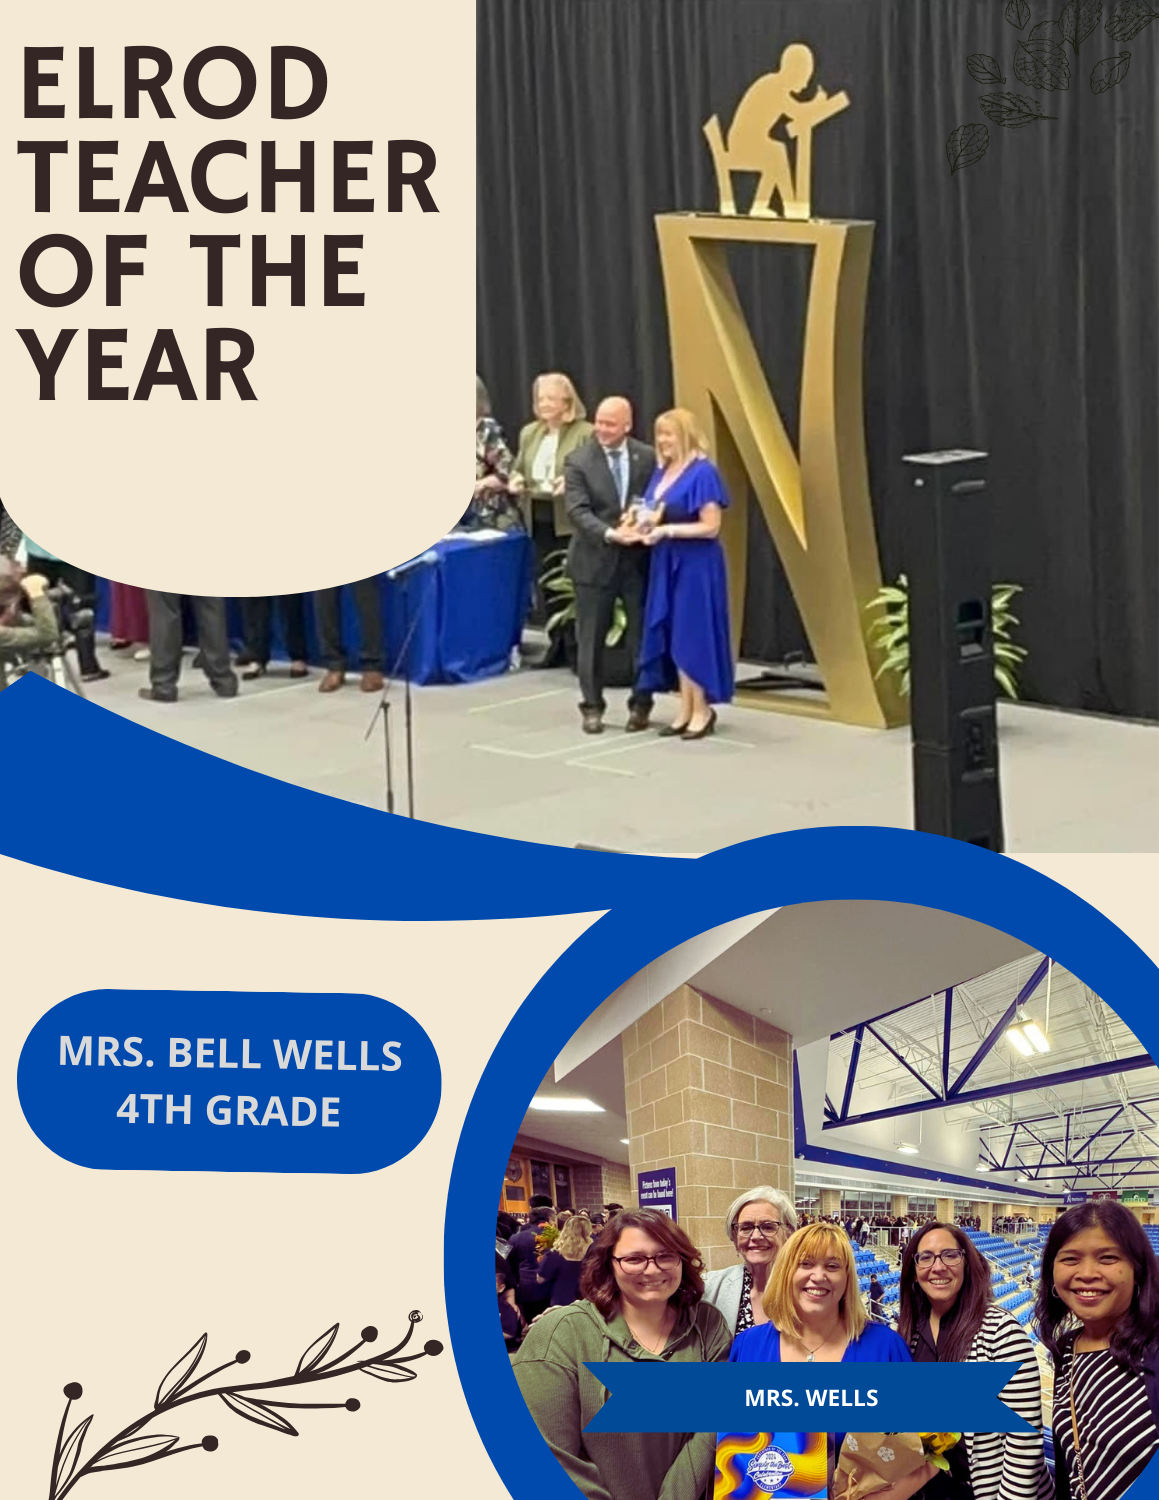 Congratulations to our 4th grade teacher, Mrs. Wells on being named Elrod's Educator of the Year.